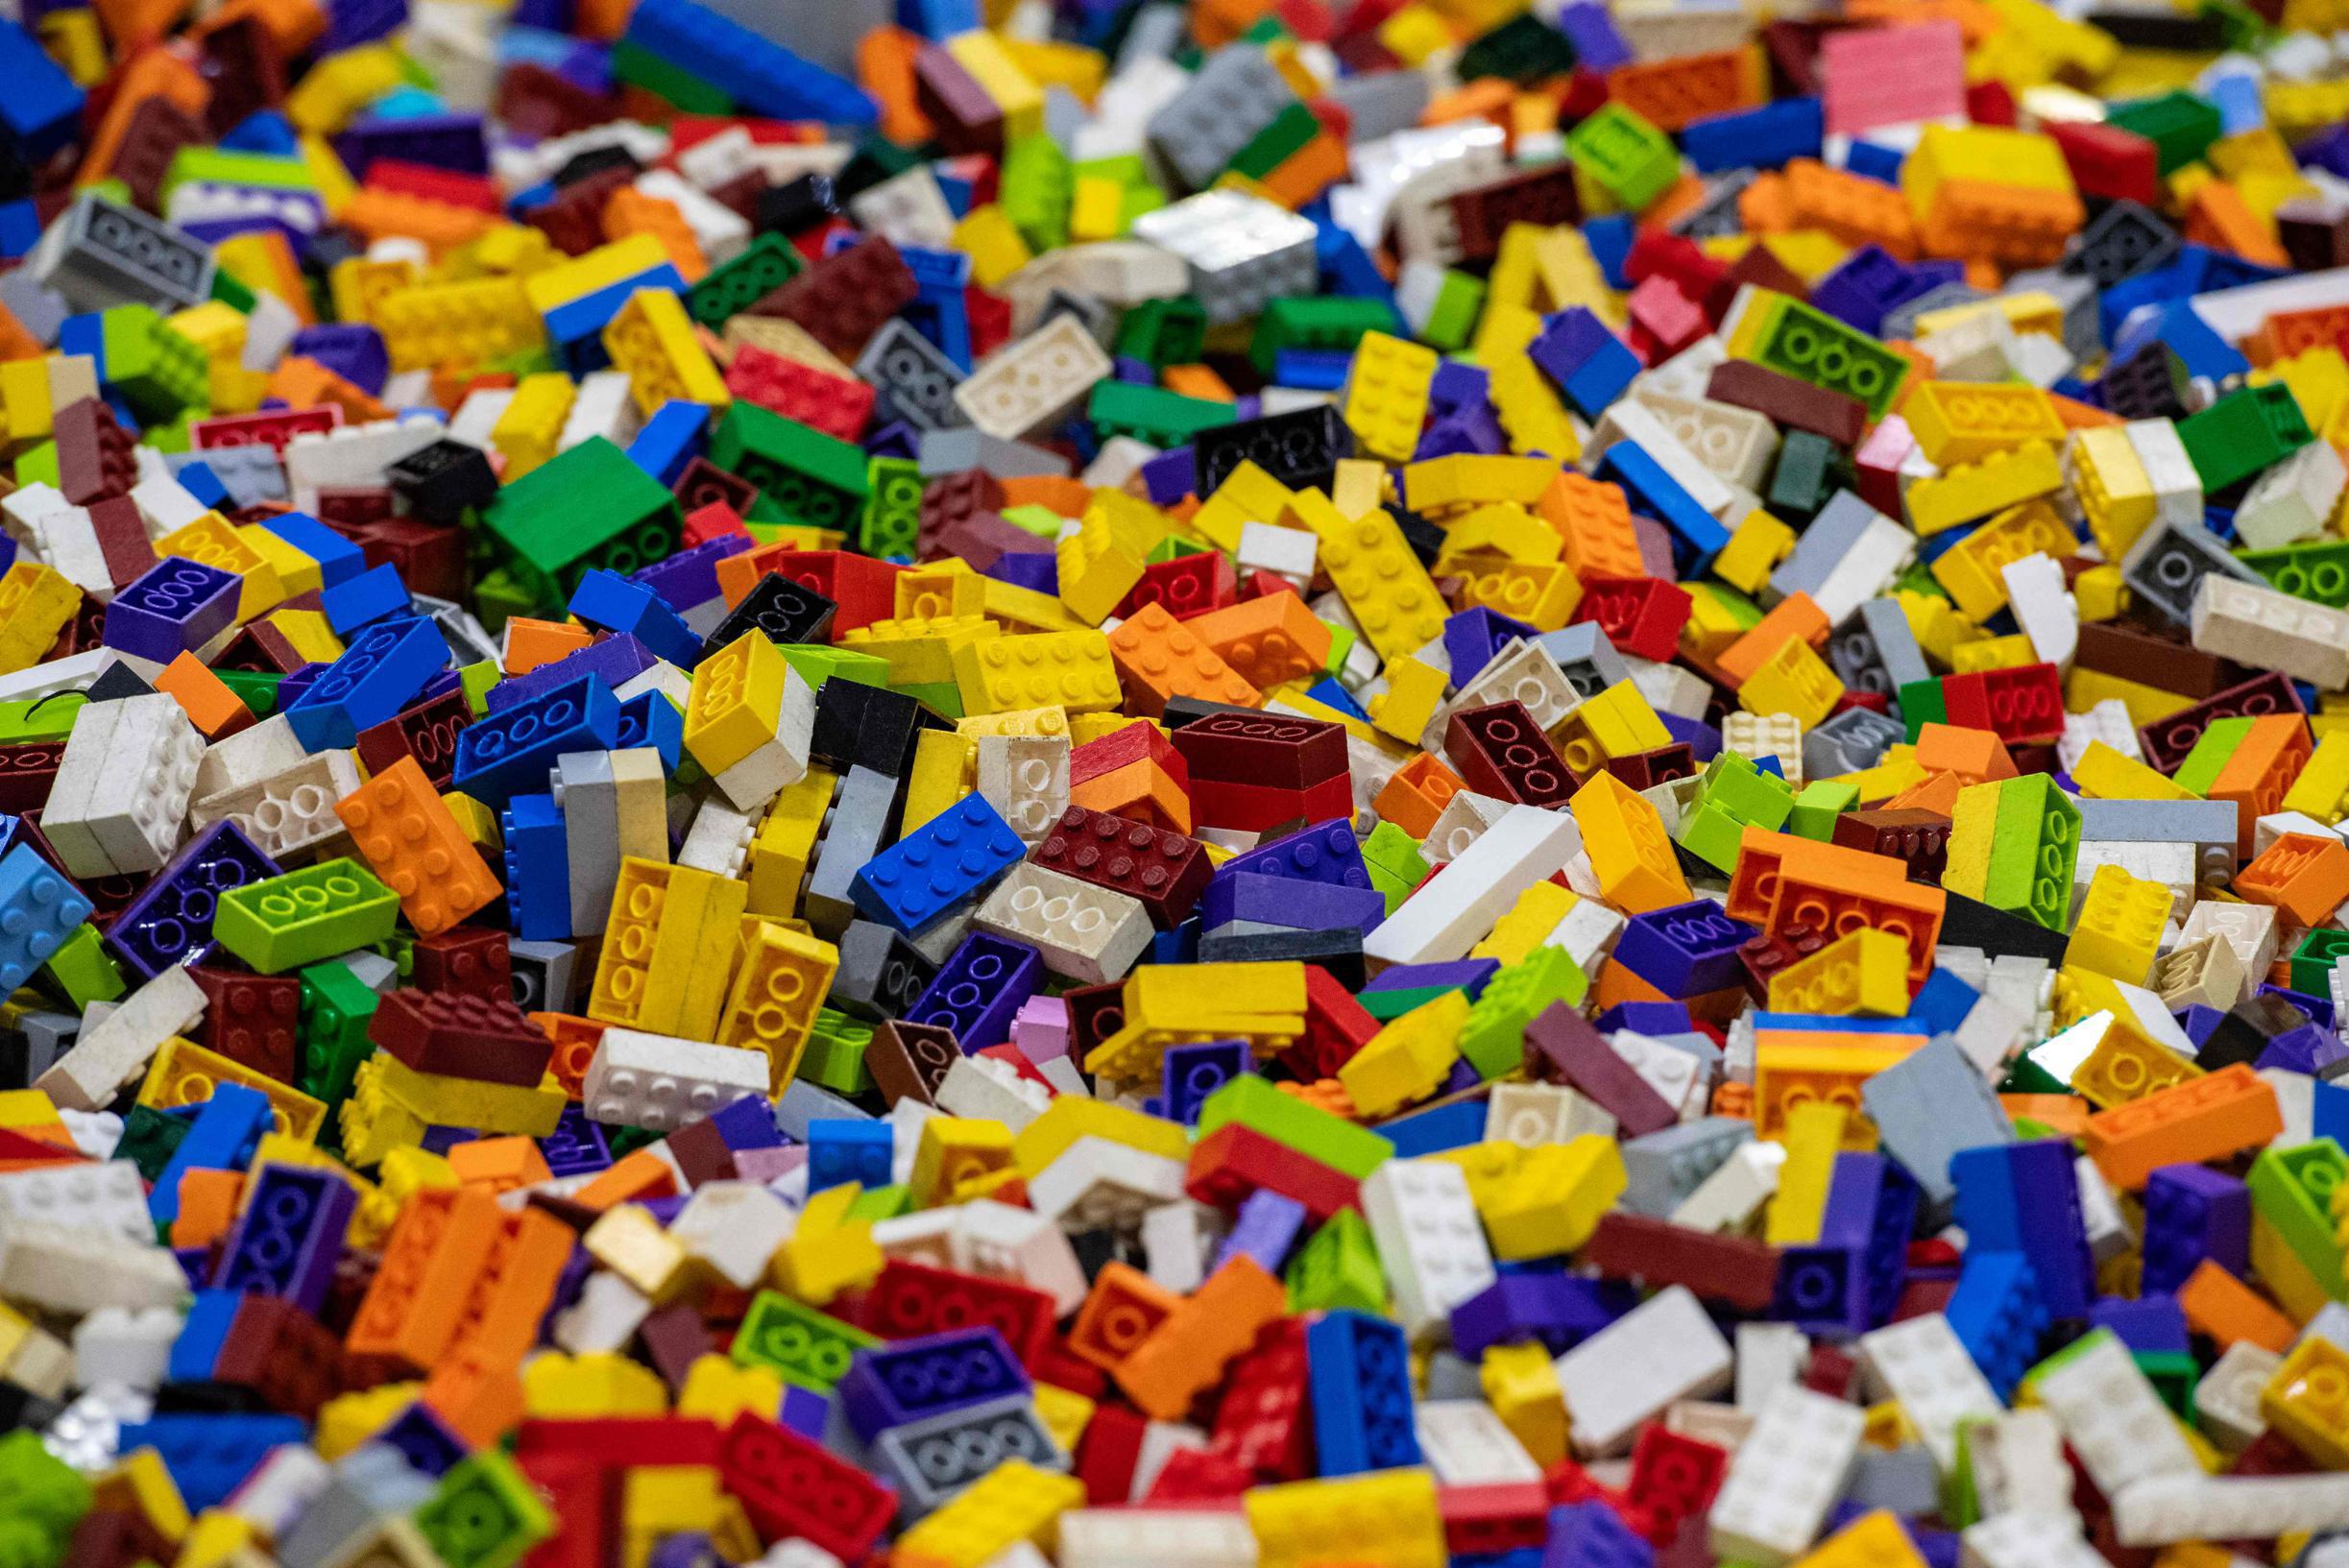 Lego Heiress Sells 850 Million Euros in Shares of Toy Company